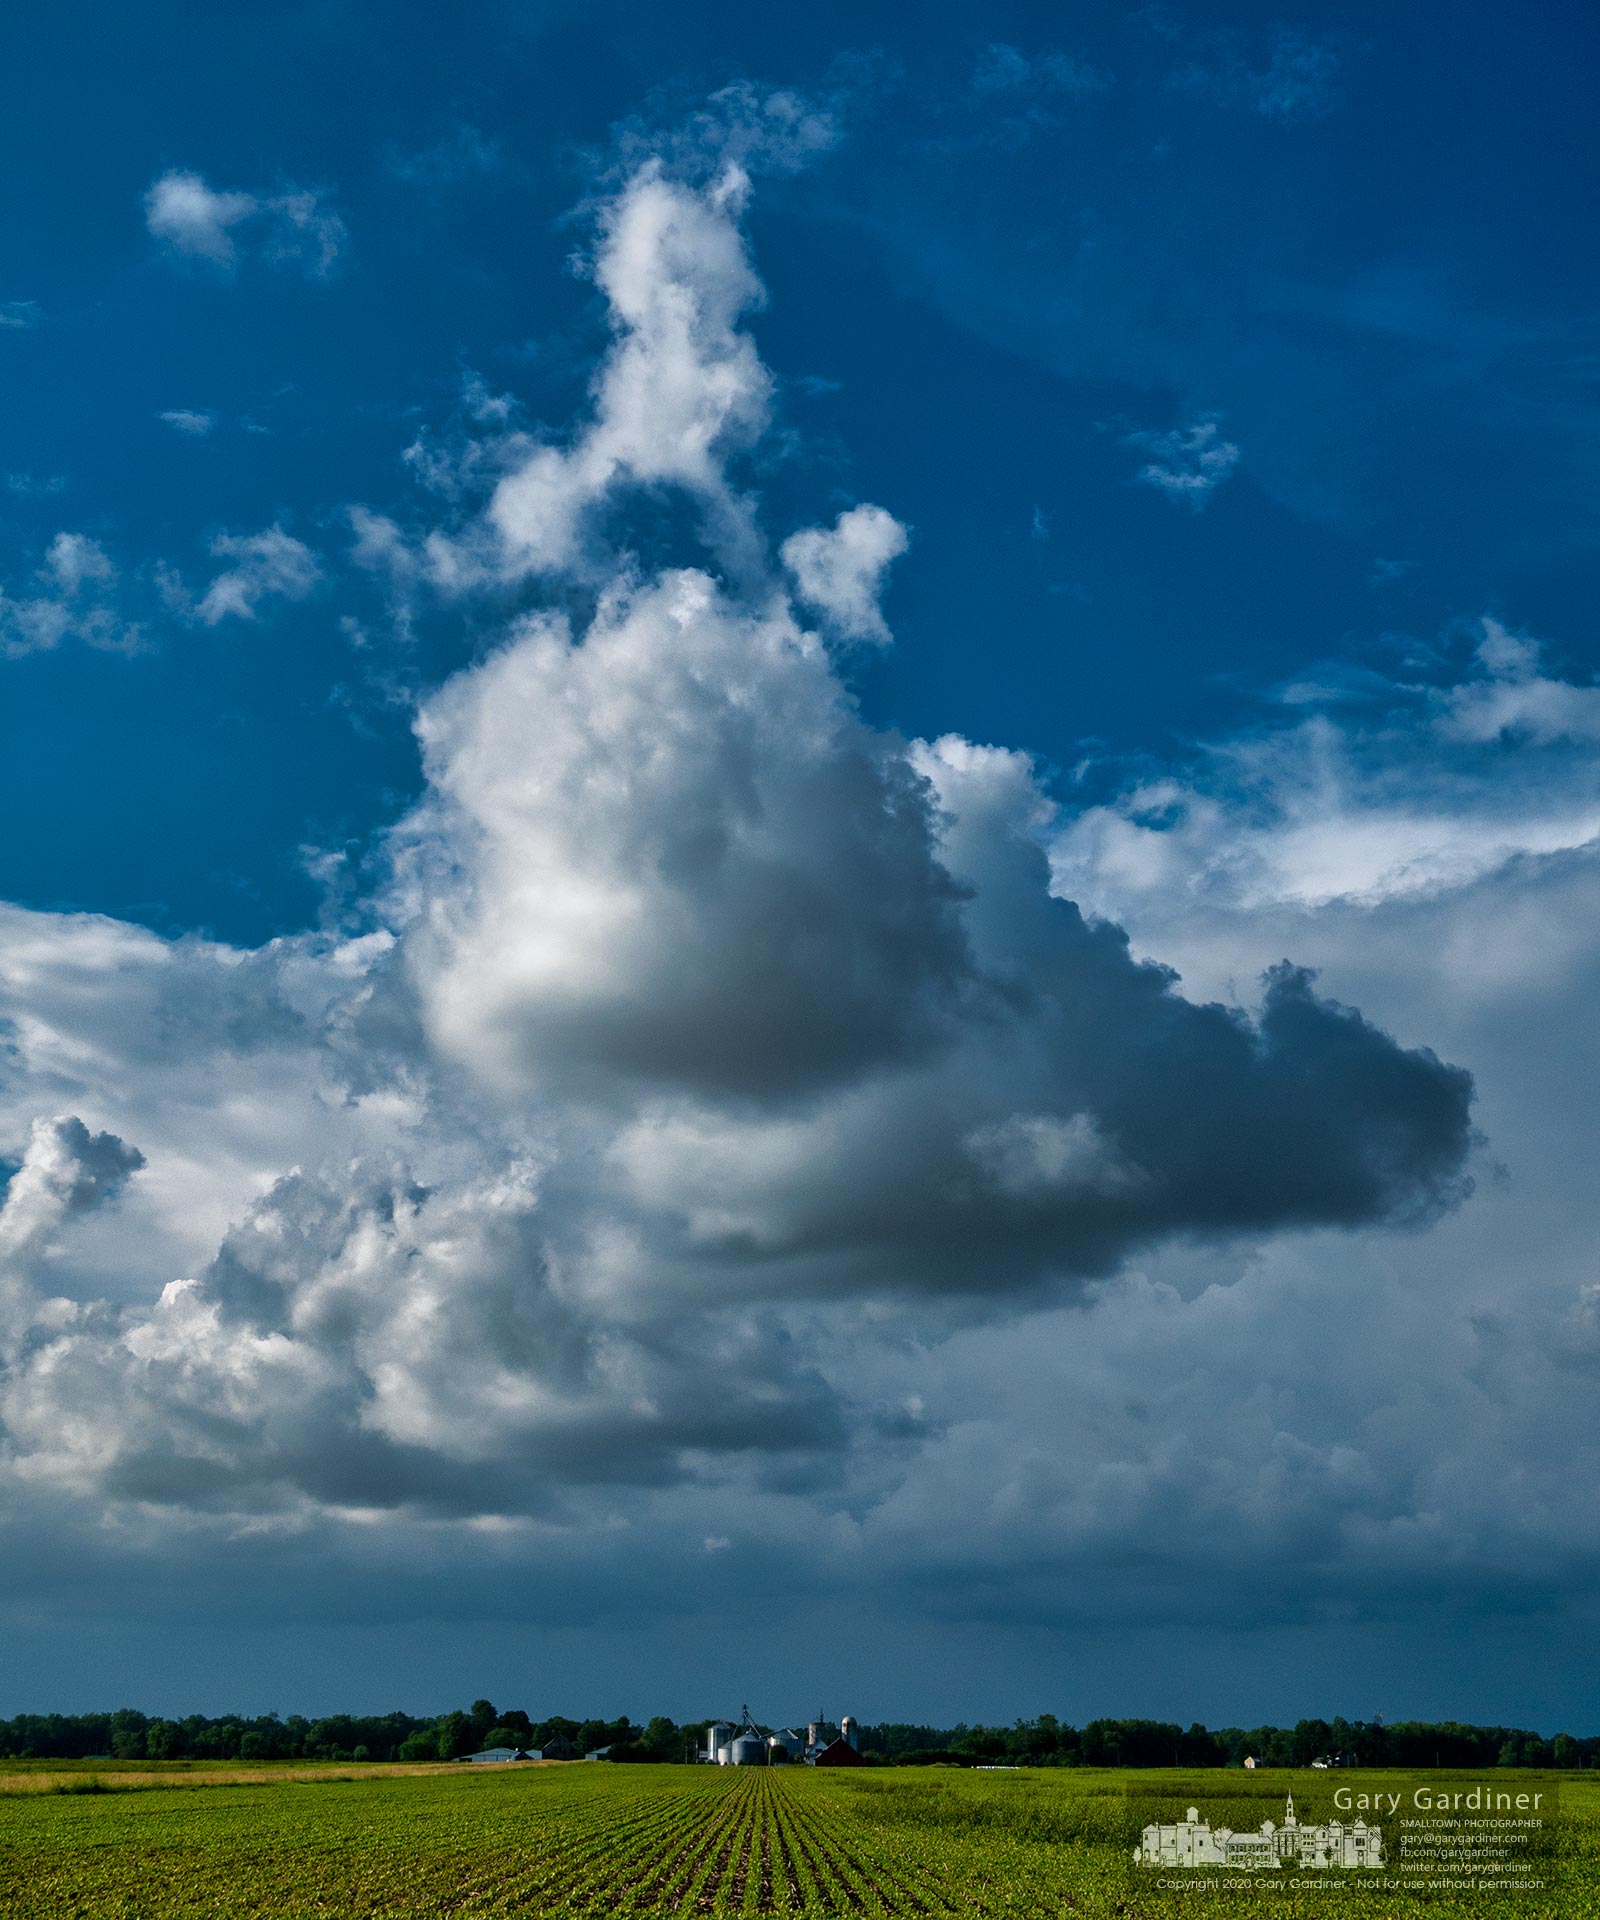 A large cloud forms in the sky over a farm on Miller Paul Road in Licking County, Ohio. My Final Photo for June 28, 2020.